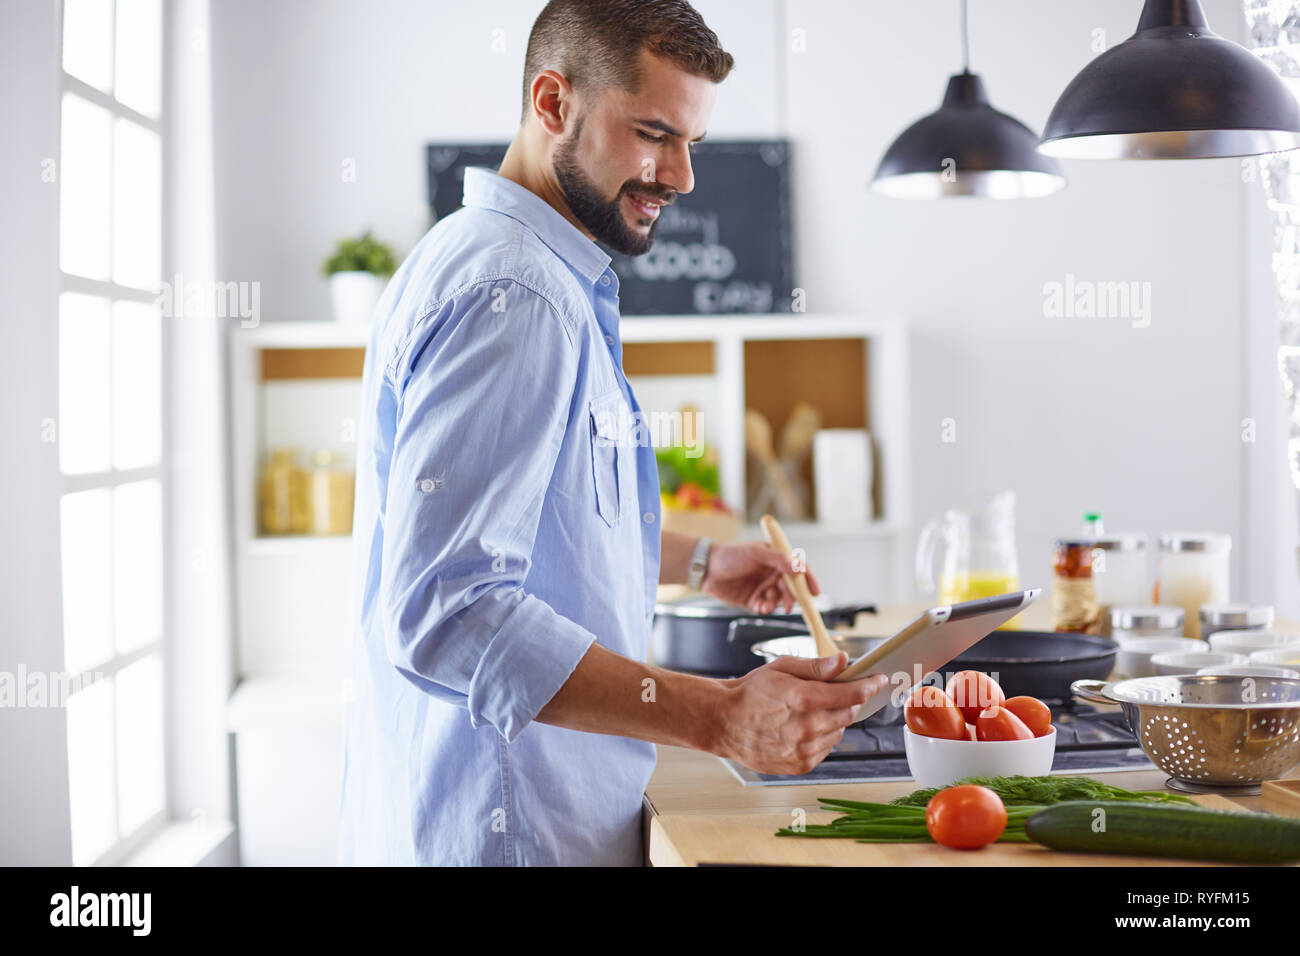 Smiling and confident chef standing in large kitchen Stock Photo